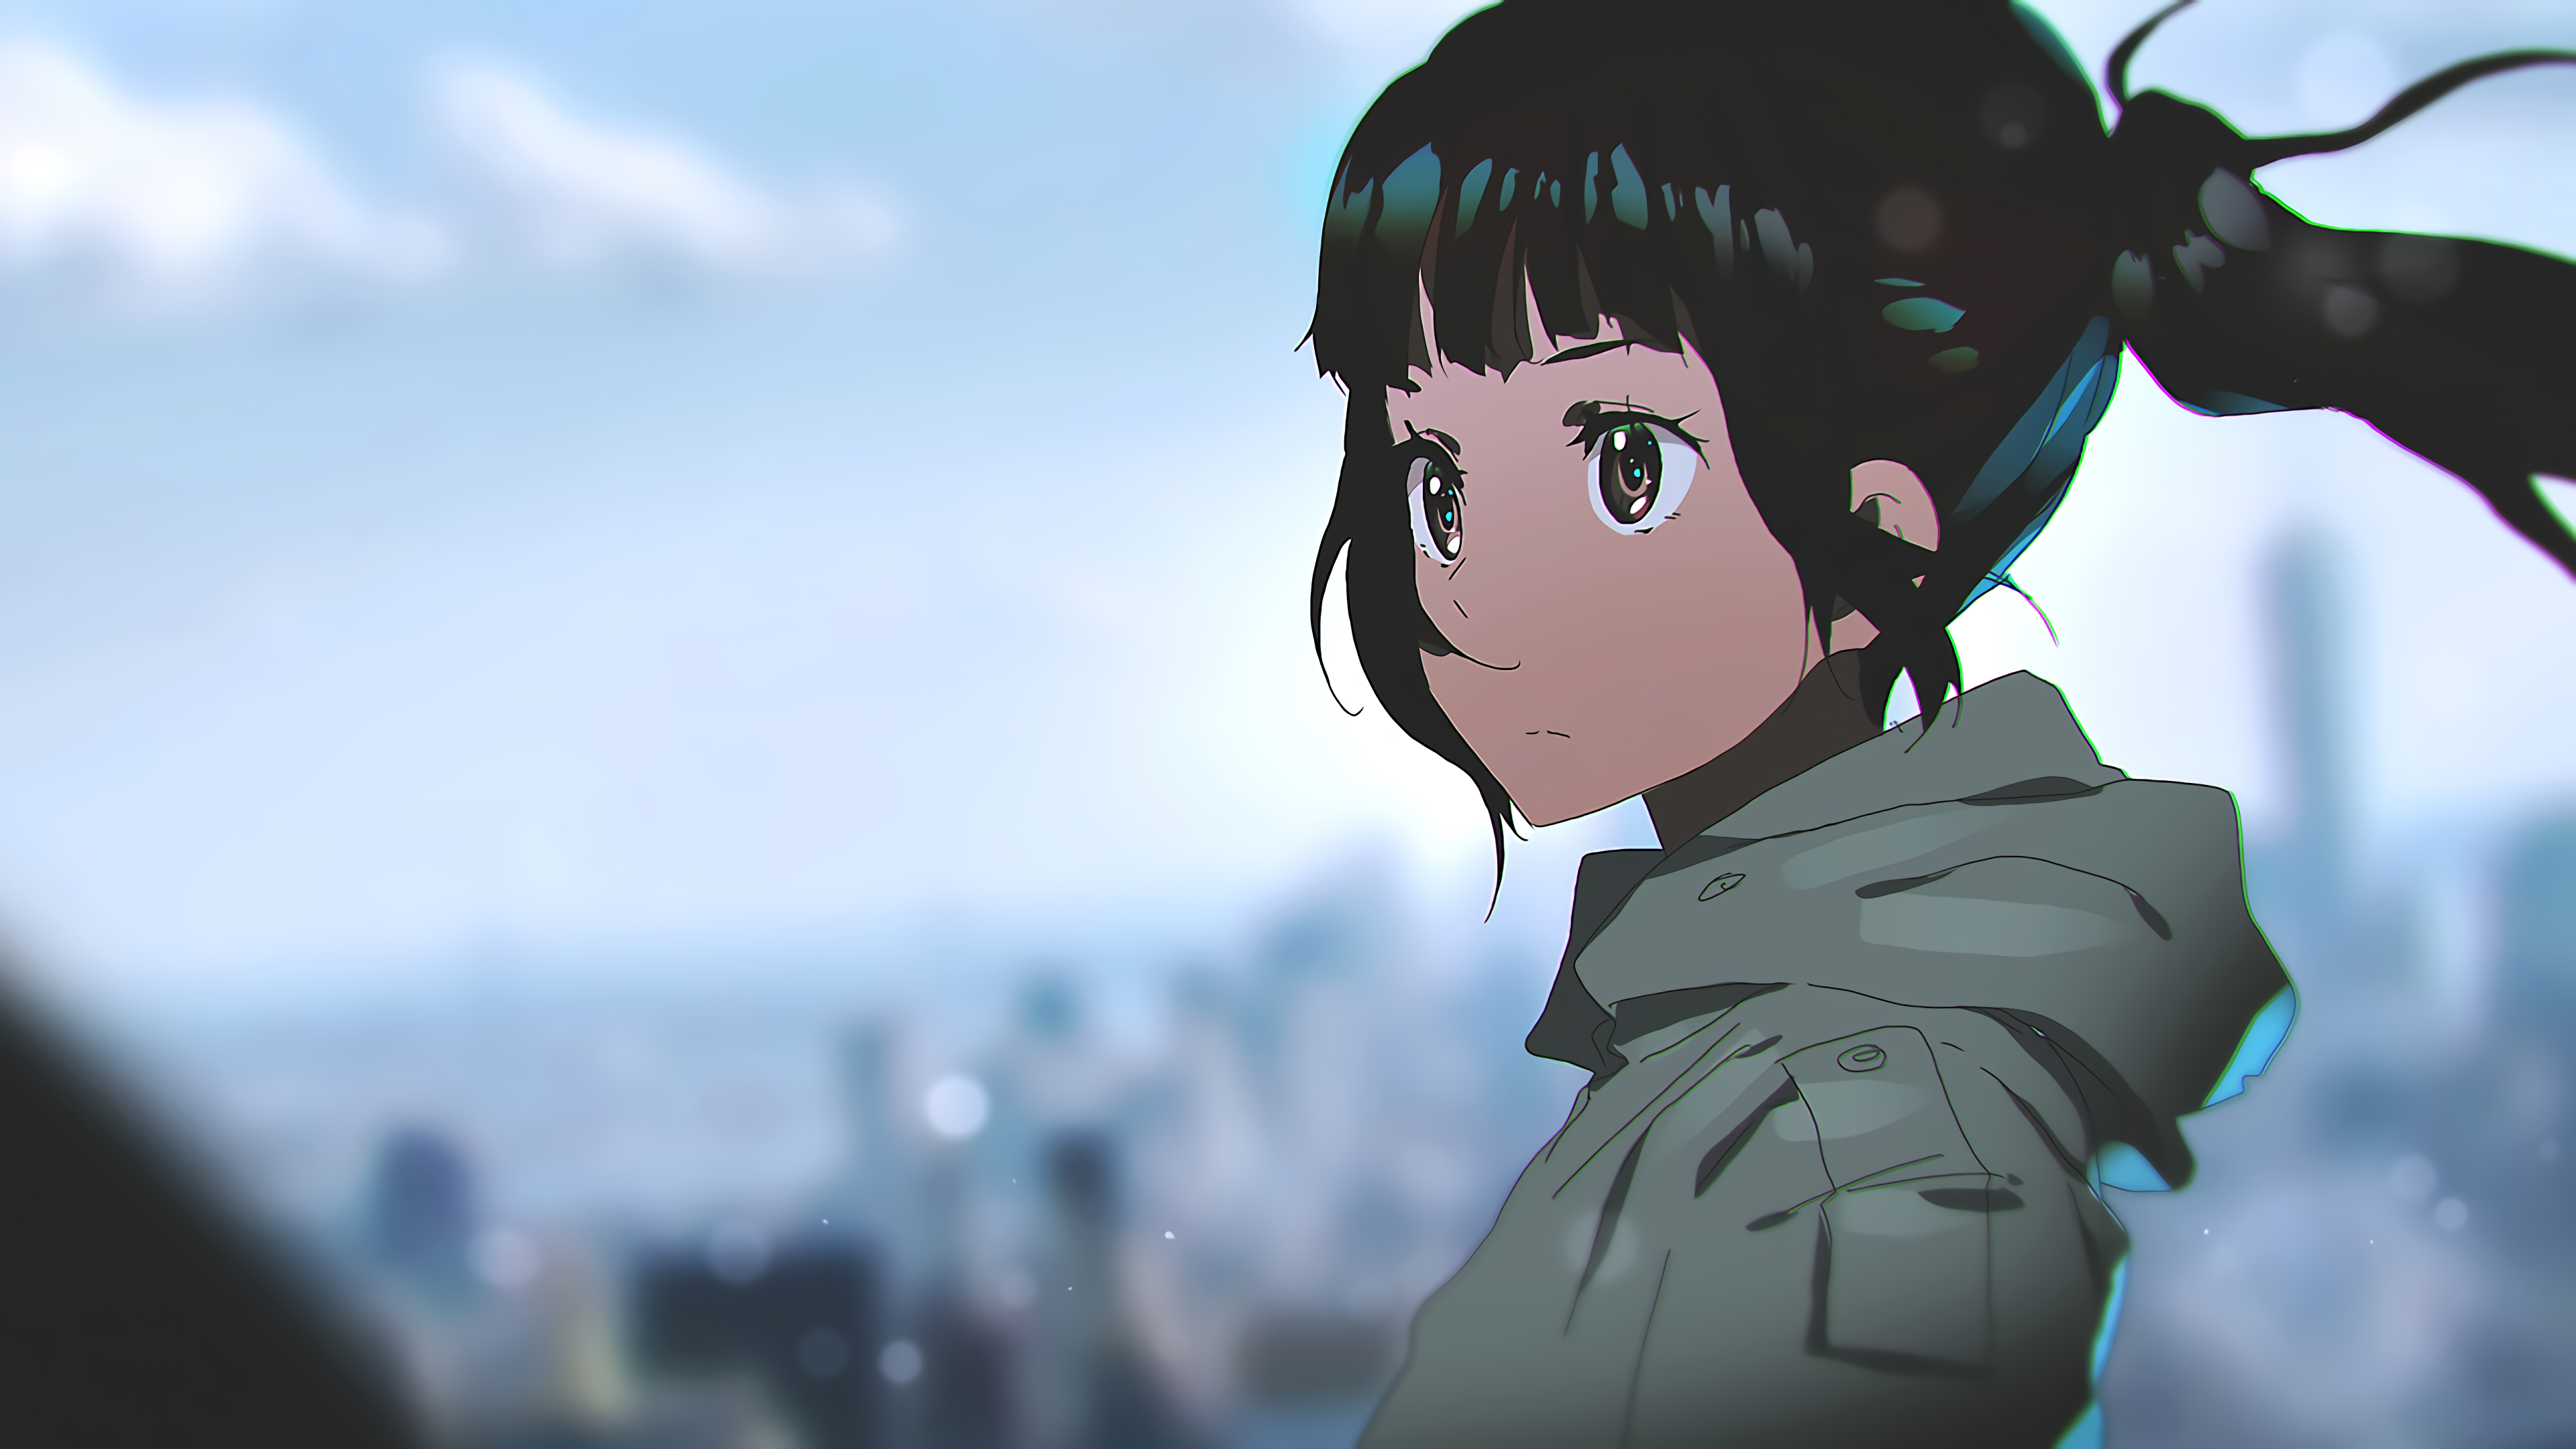 Anime 3840x2160 Tom Skender anime girls anime DeviantArt face looking away blurred blurry background ponytail clouds hoods closed mouth frown simple background minimalism